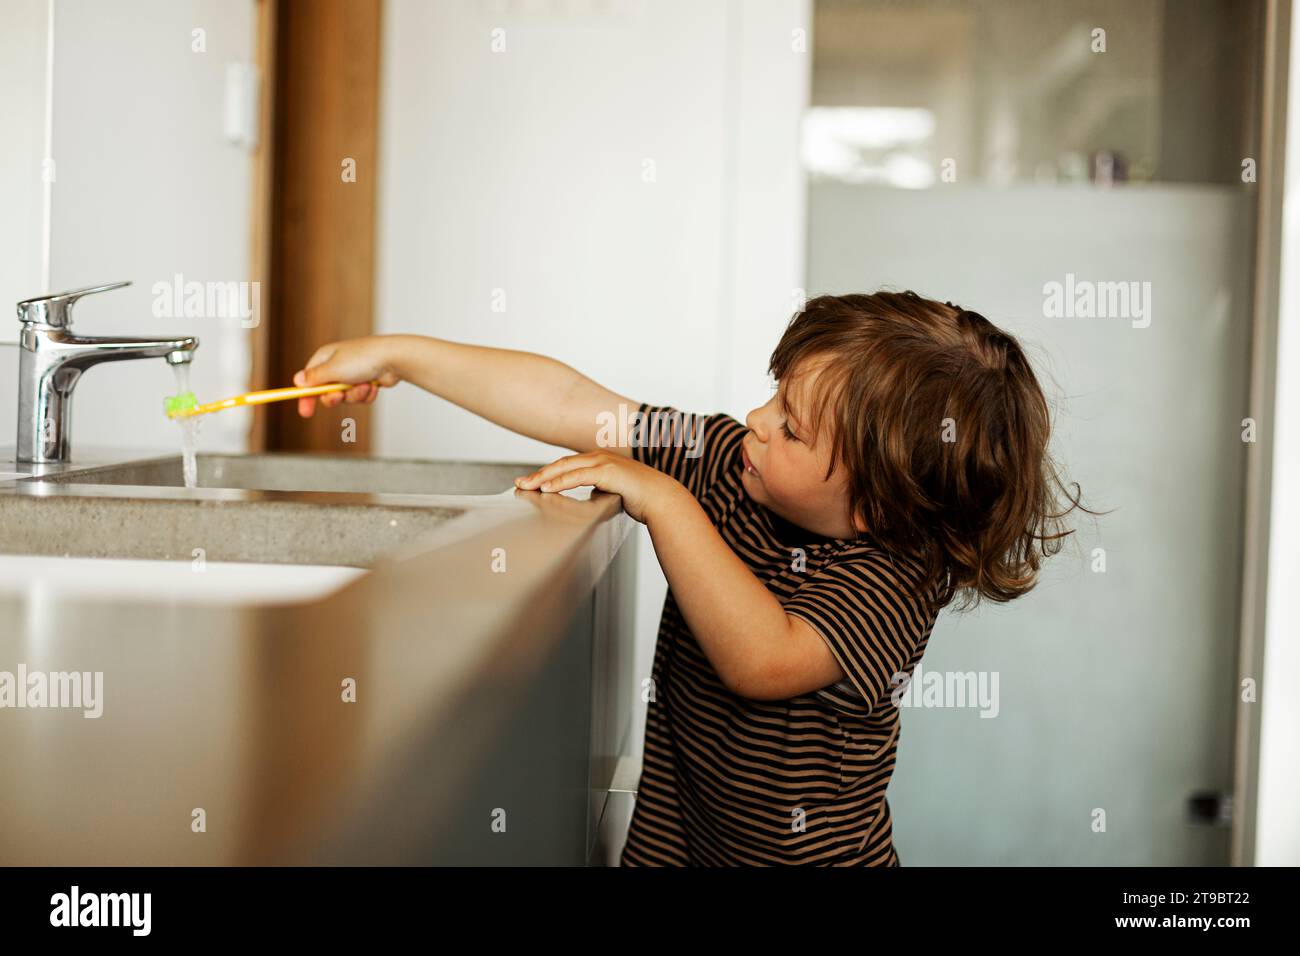 Boy holding toothbrush under running water from faucet Stock Photo